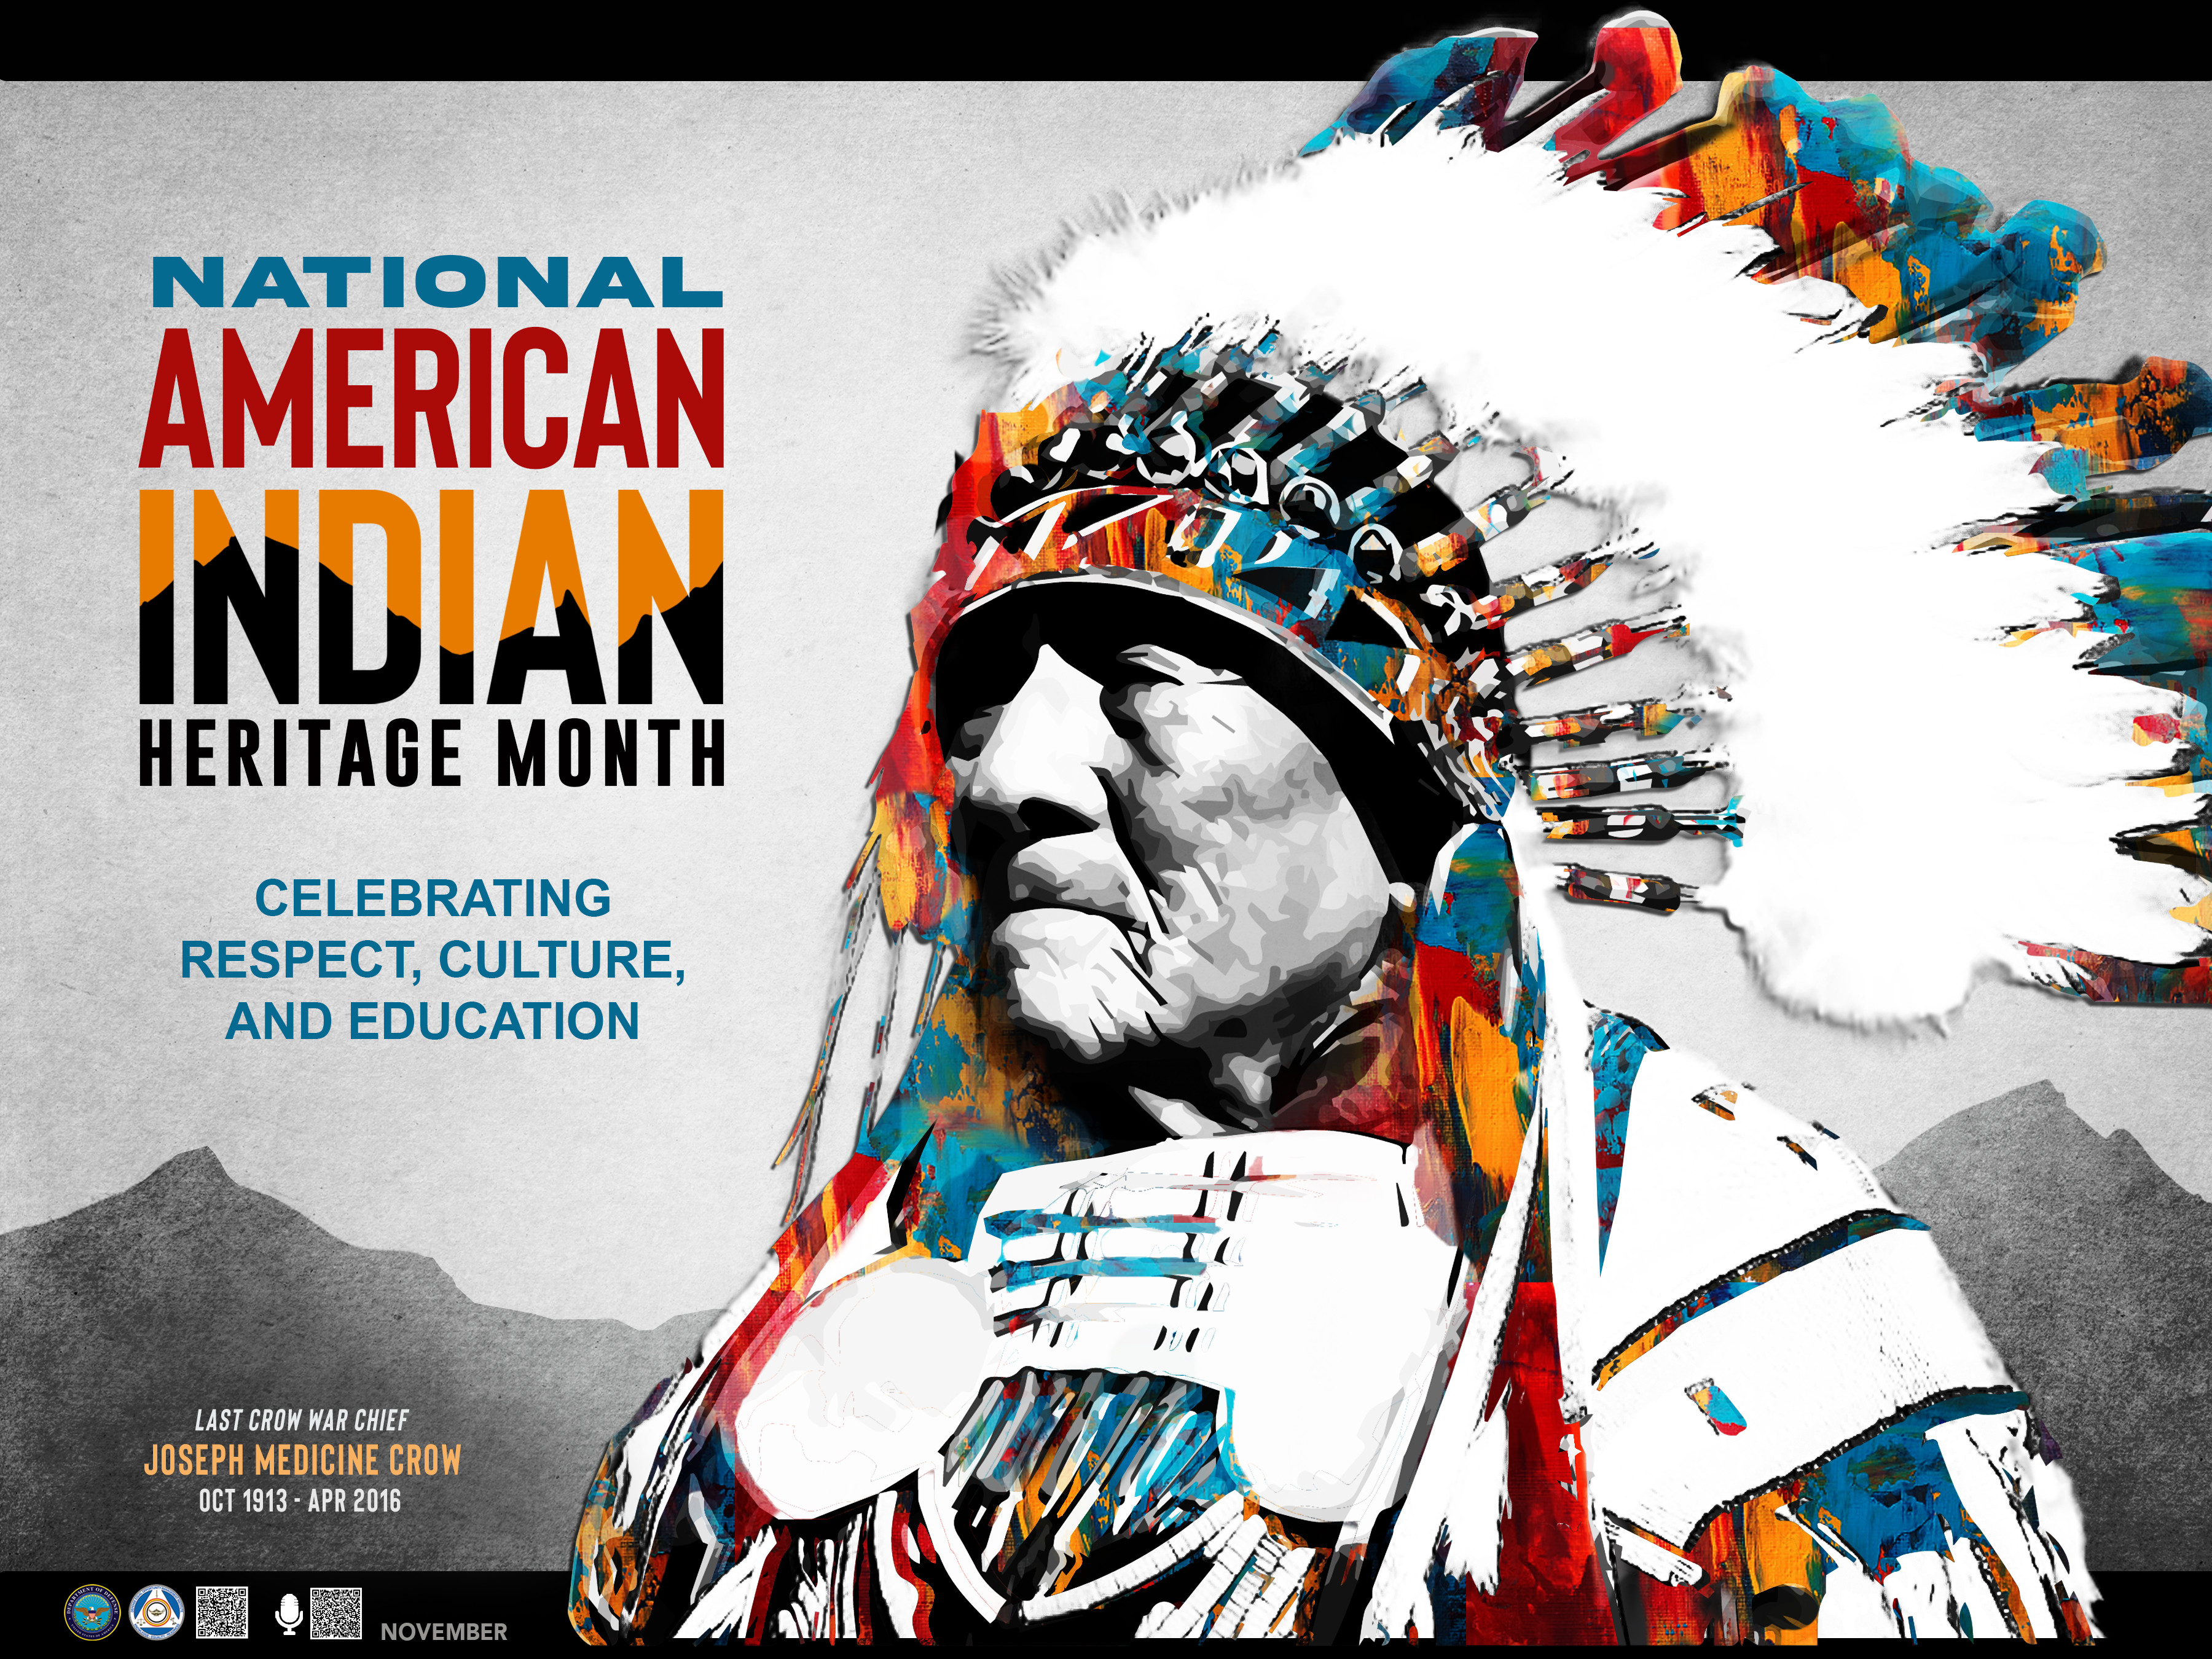 New poster celebrates Native American Heritage Month